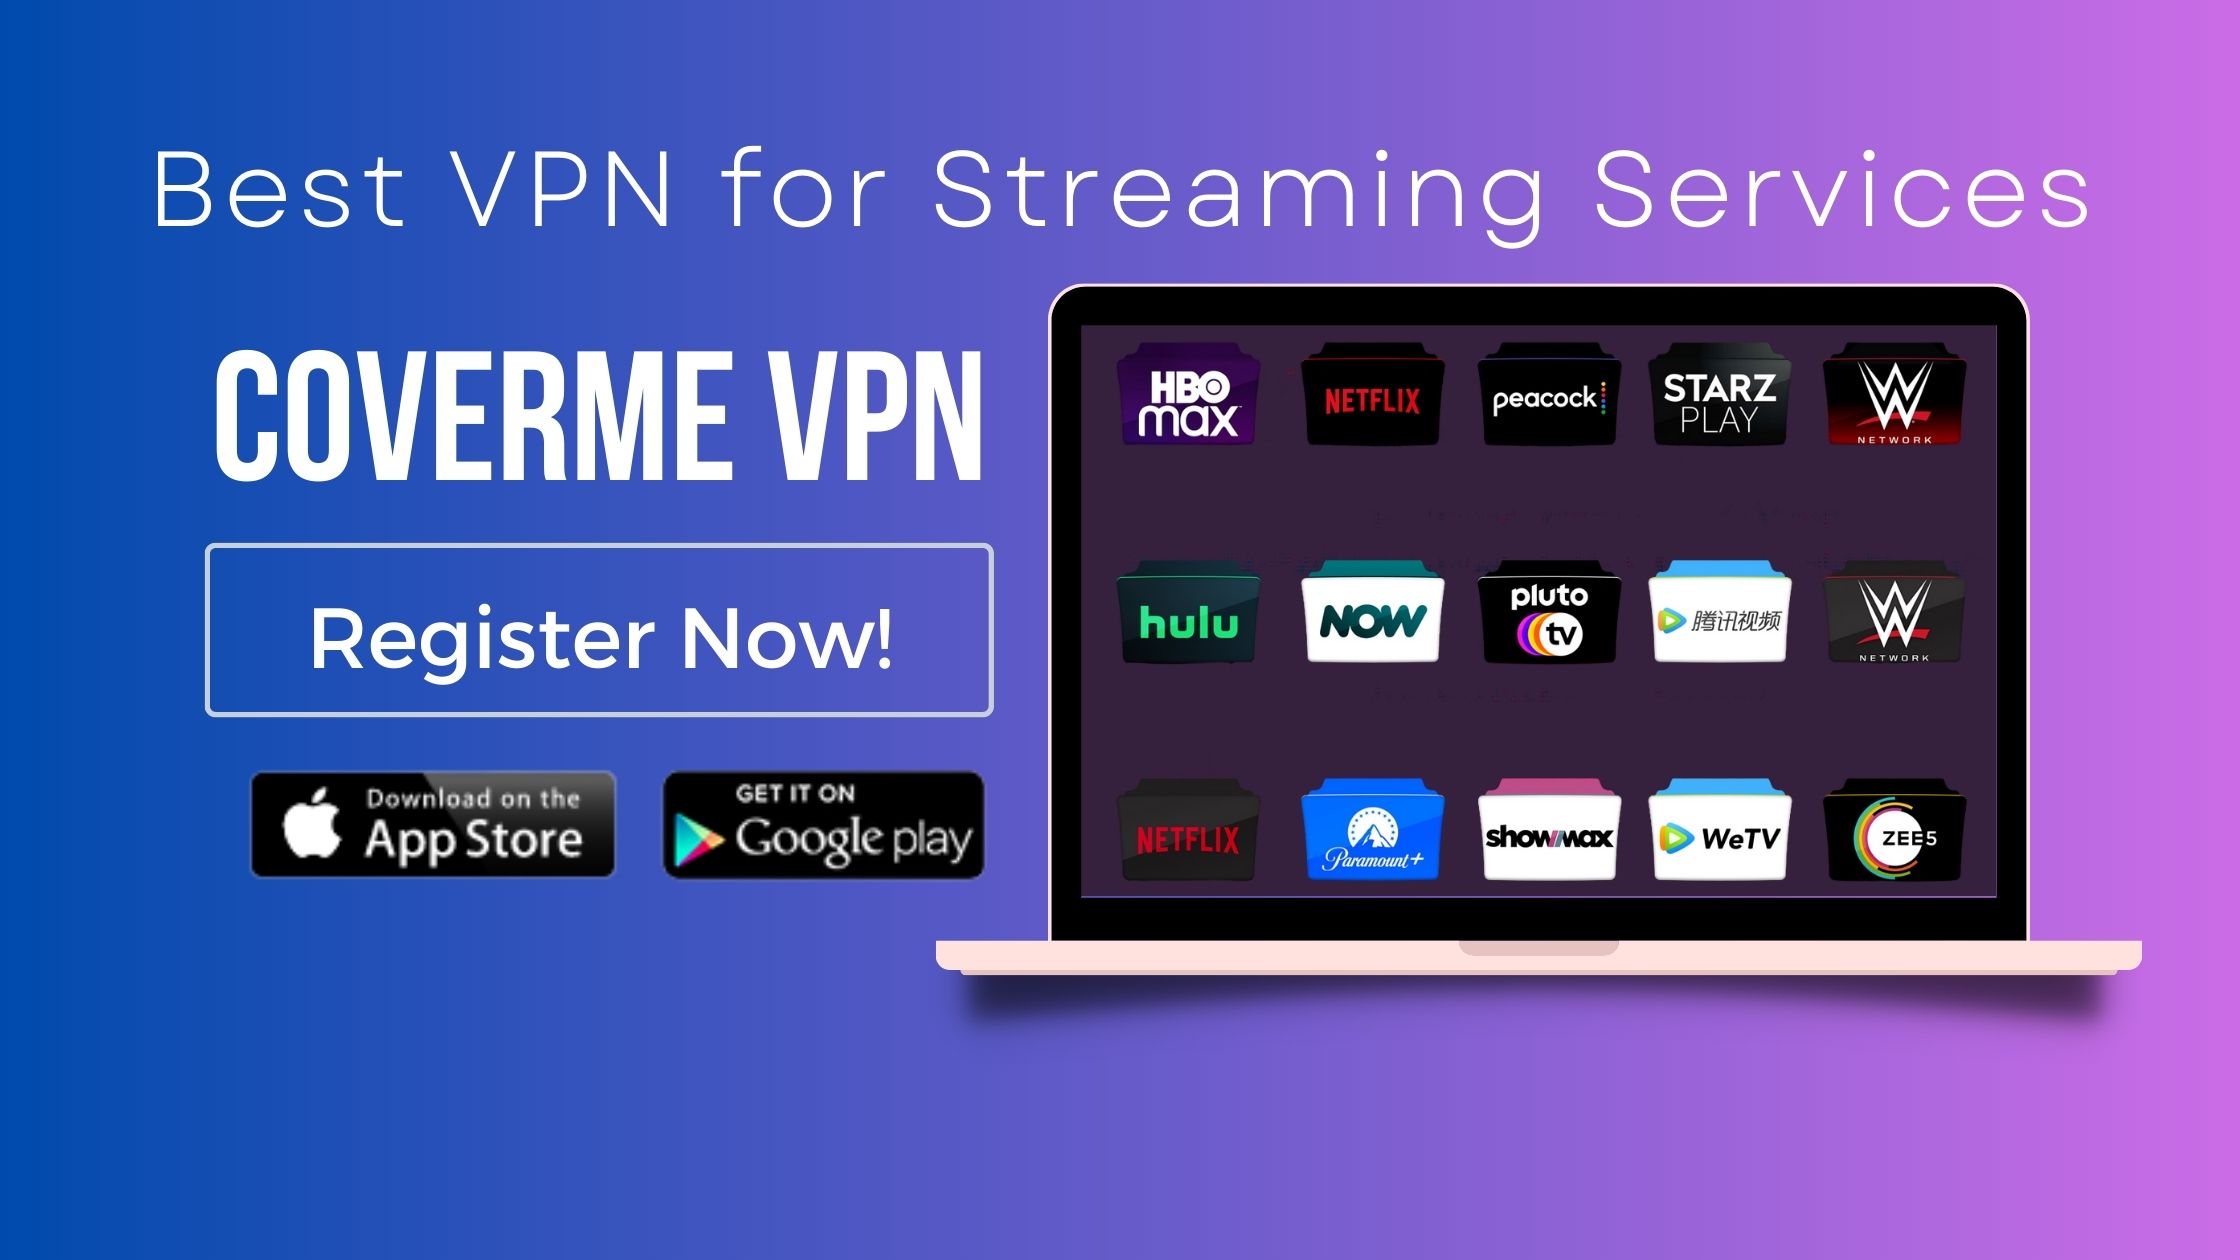 Best VPN for Streaming Services